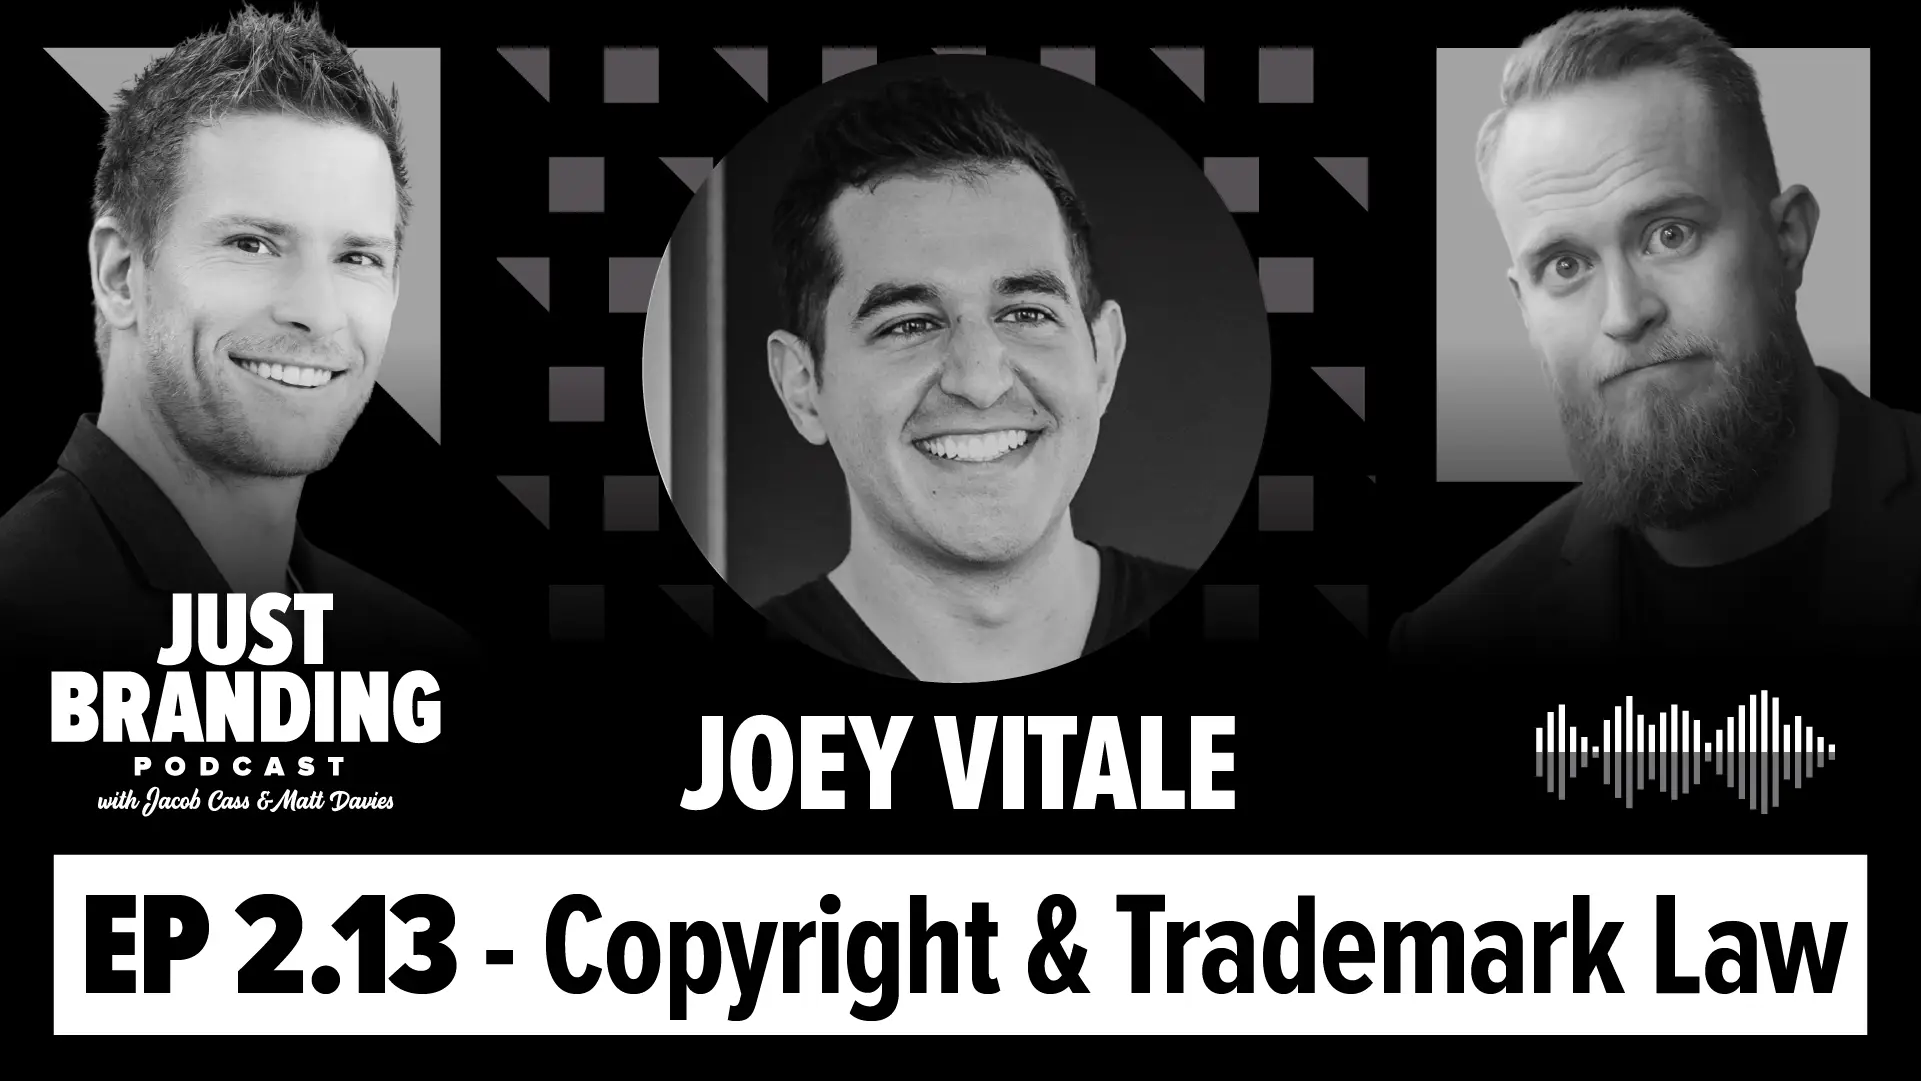 Copyright & Trademark Law with Joey Vitale